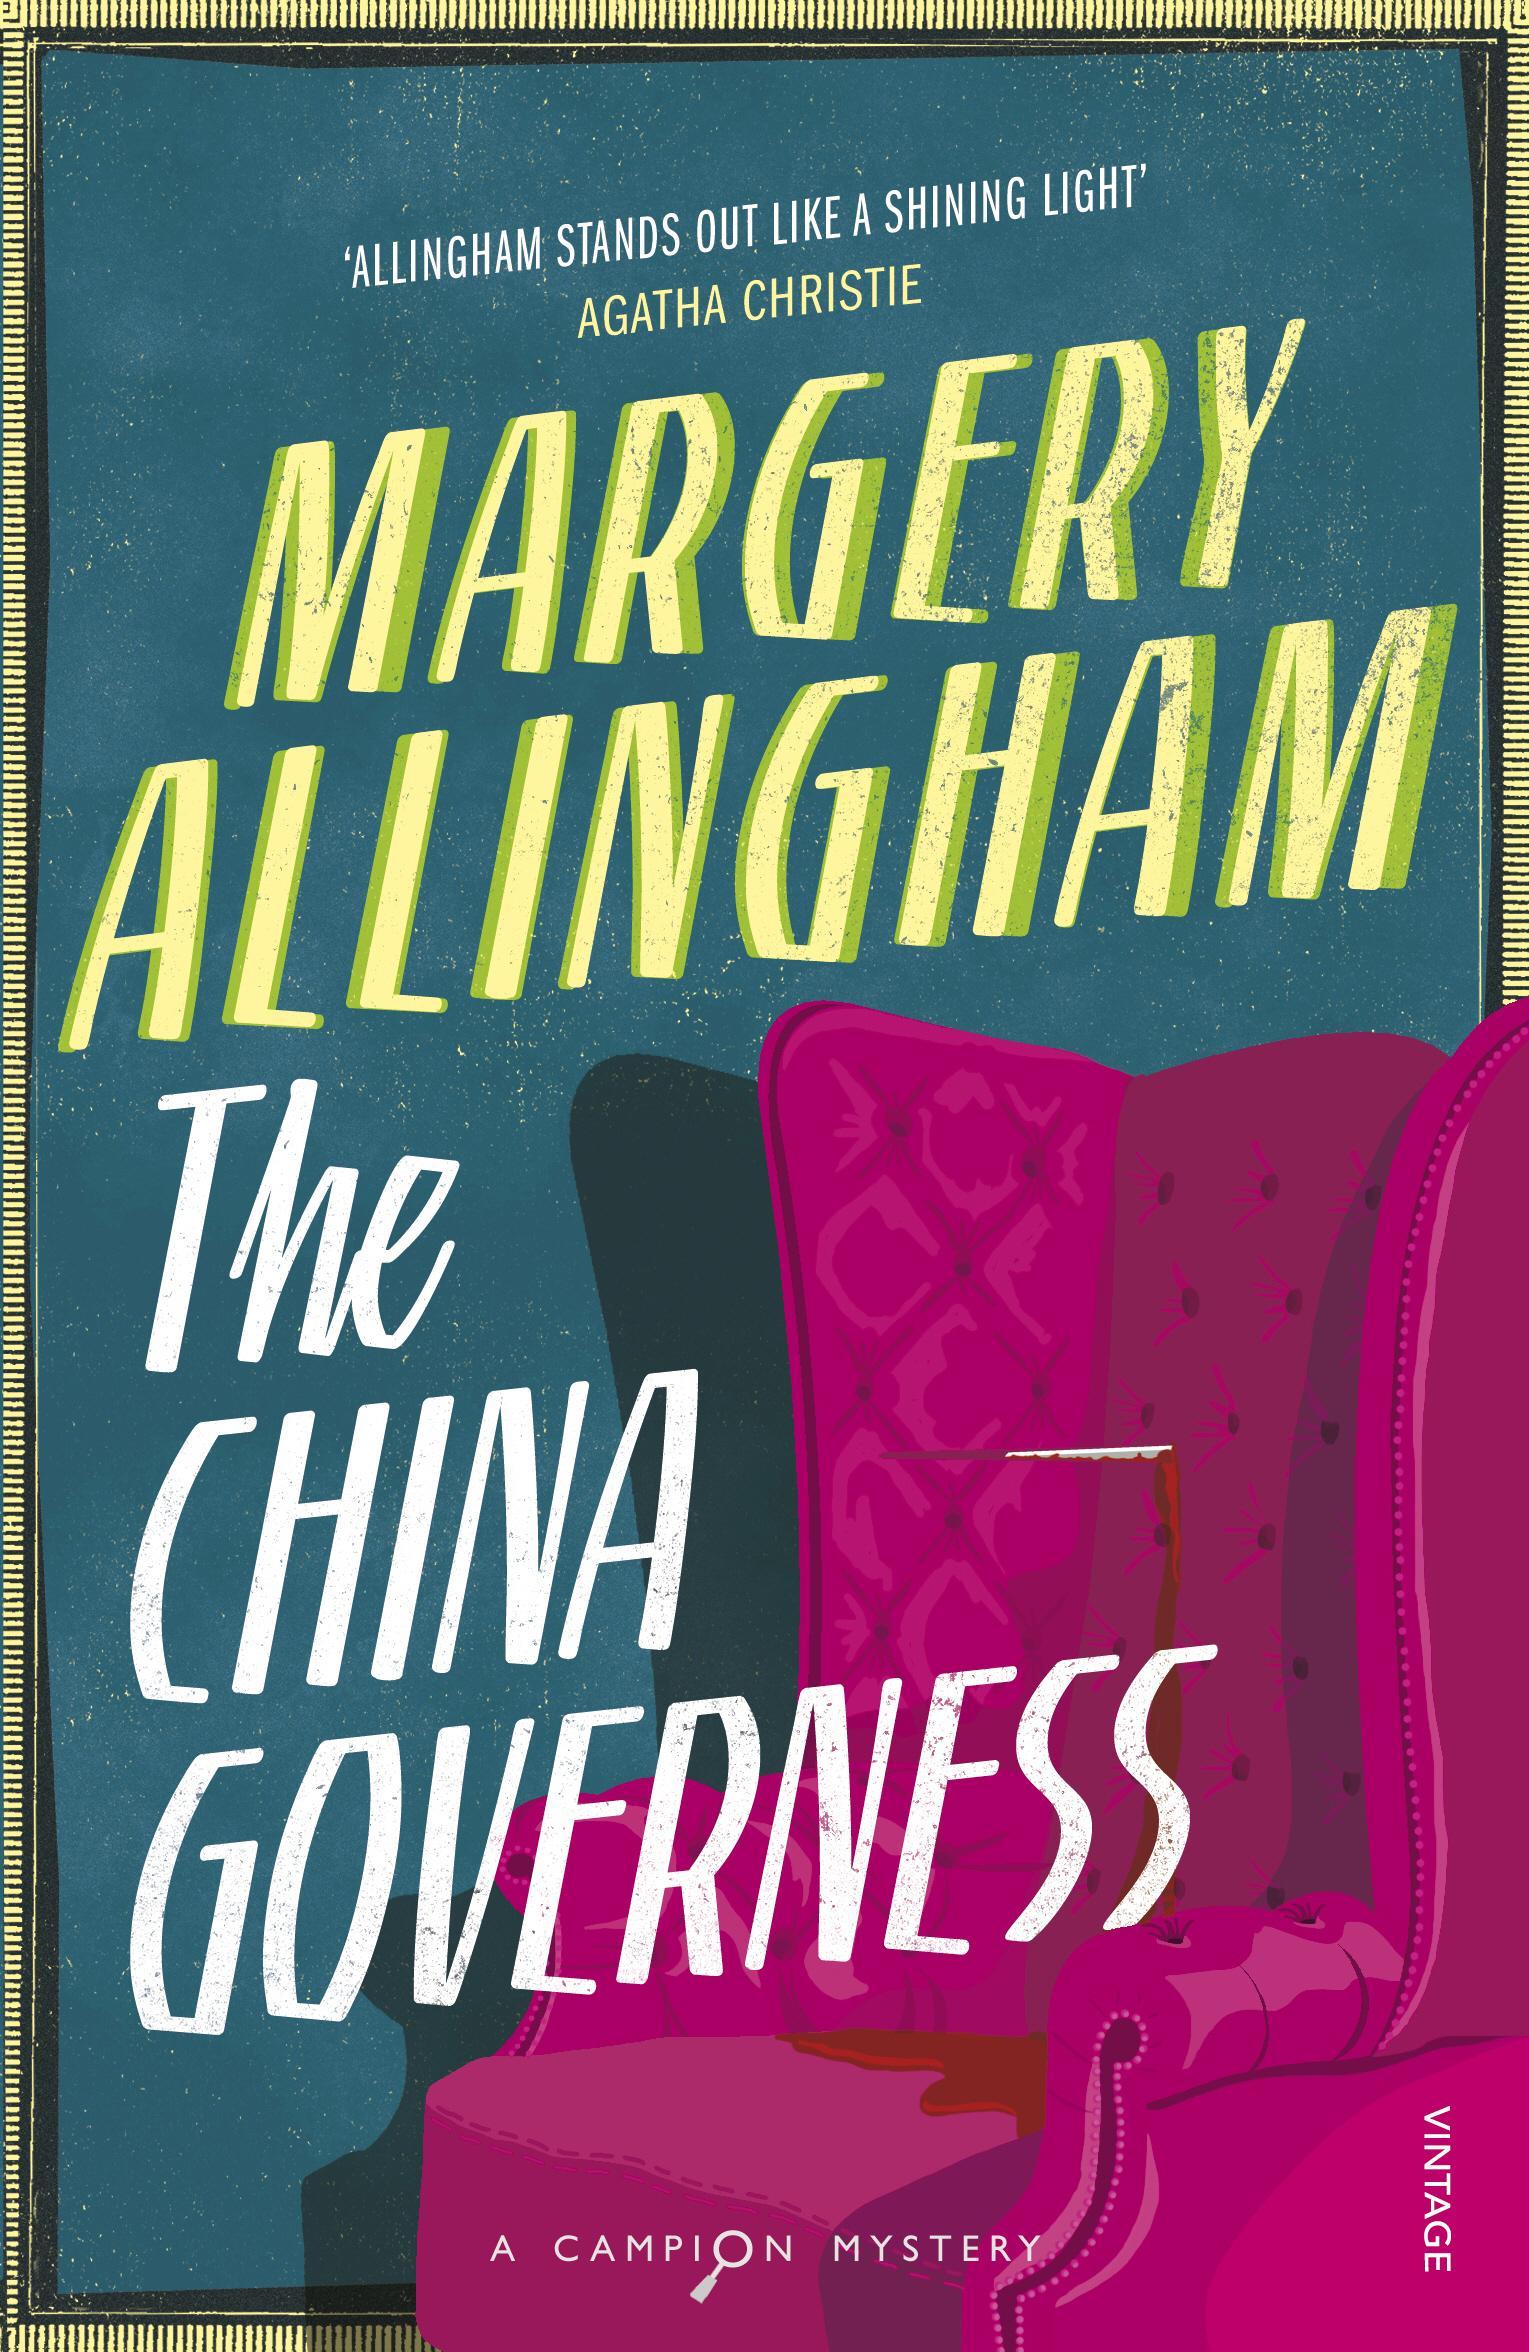 China Governess - Margery Allingham